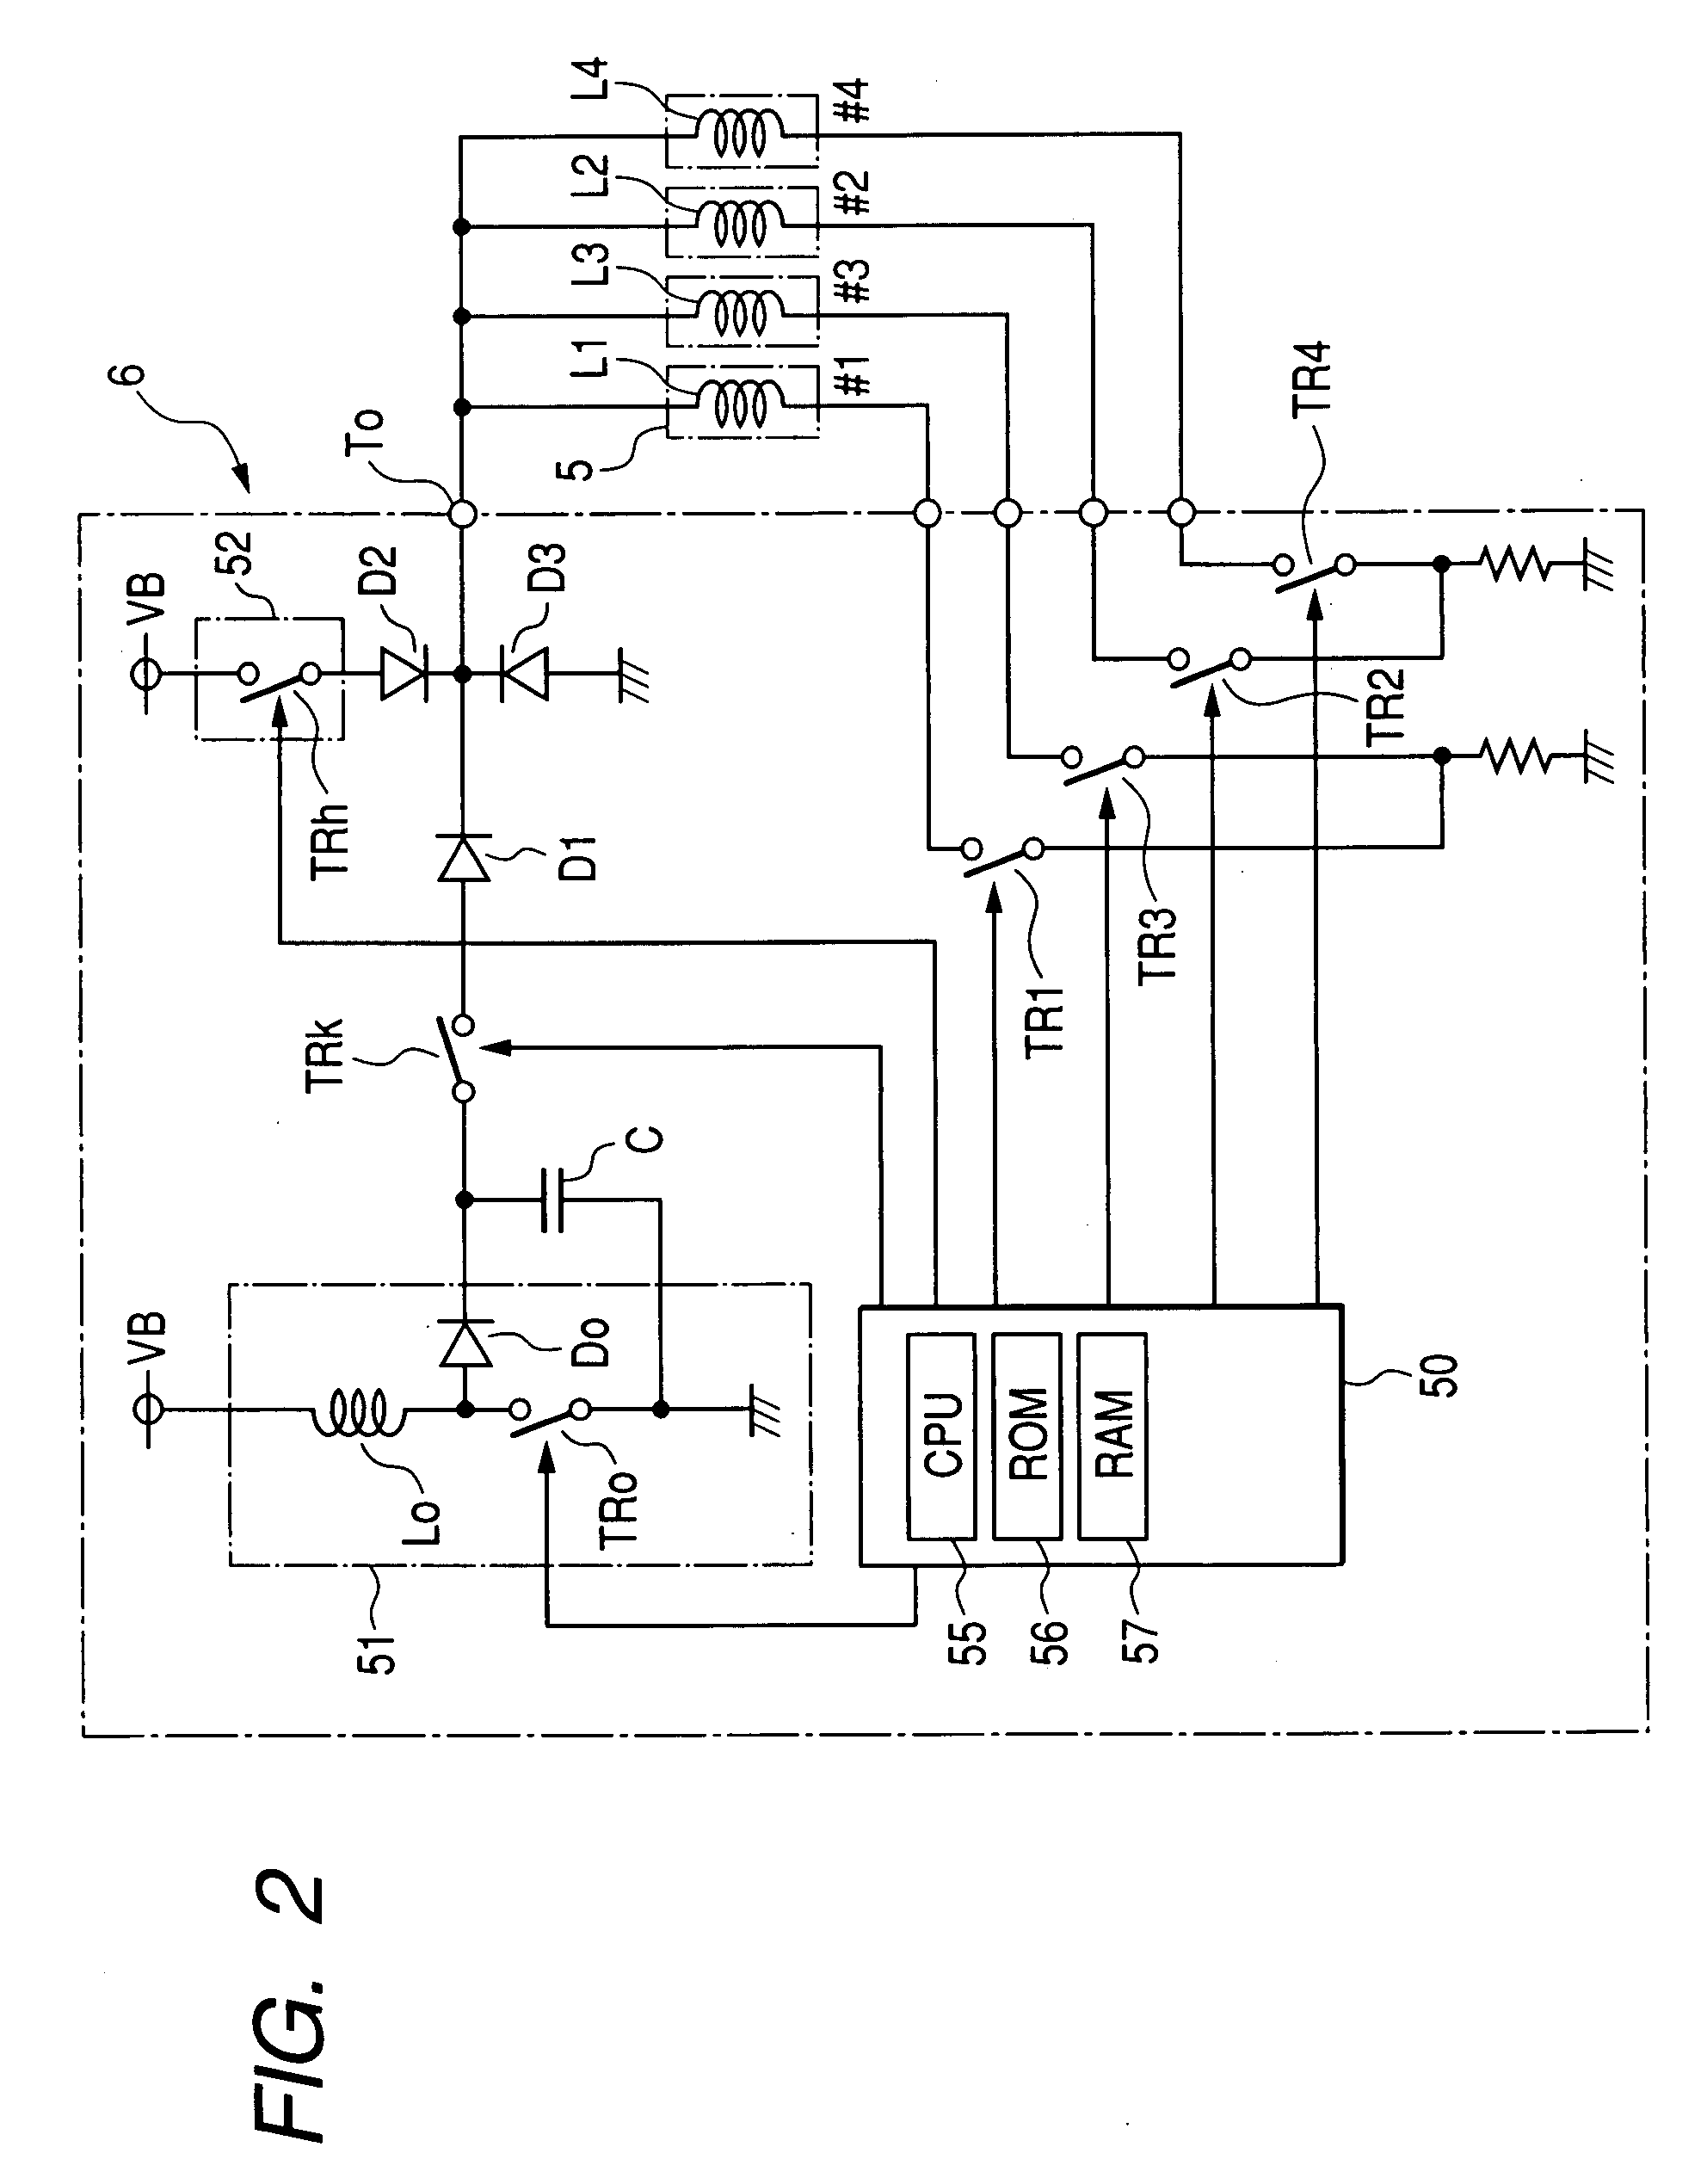 Fuel injection control system designed to eliminate overlap between multiple fuel injection events